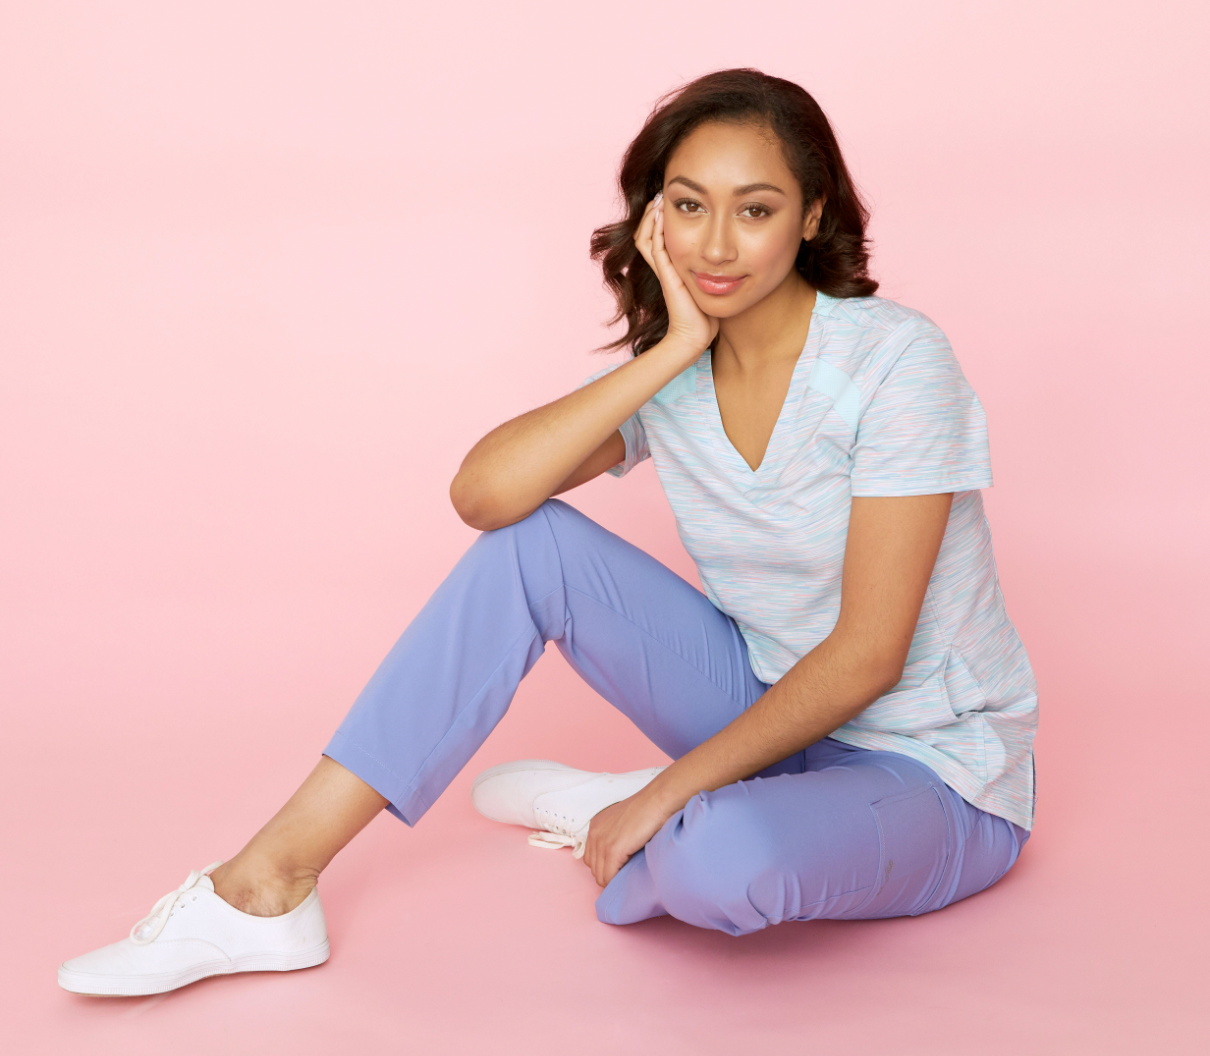 How to Choose the Right Scrubs for Your Body Type